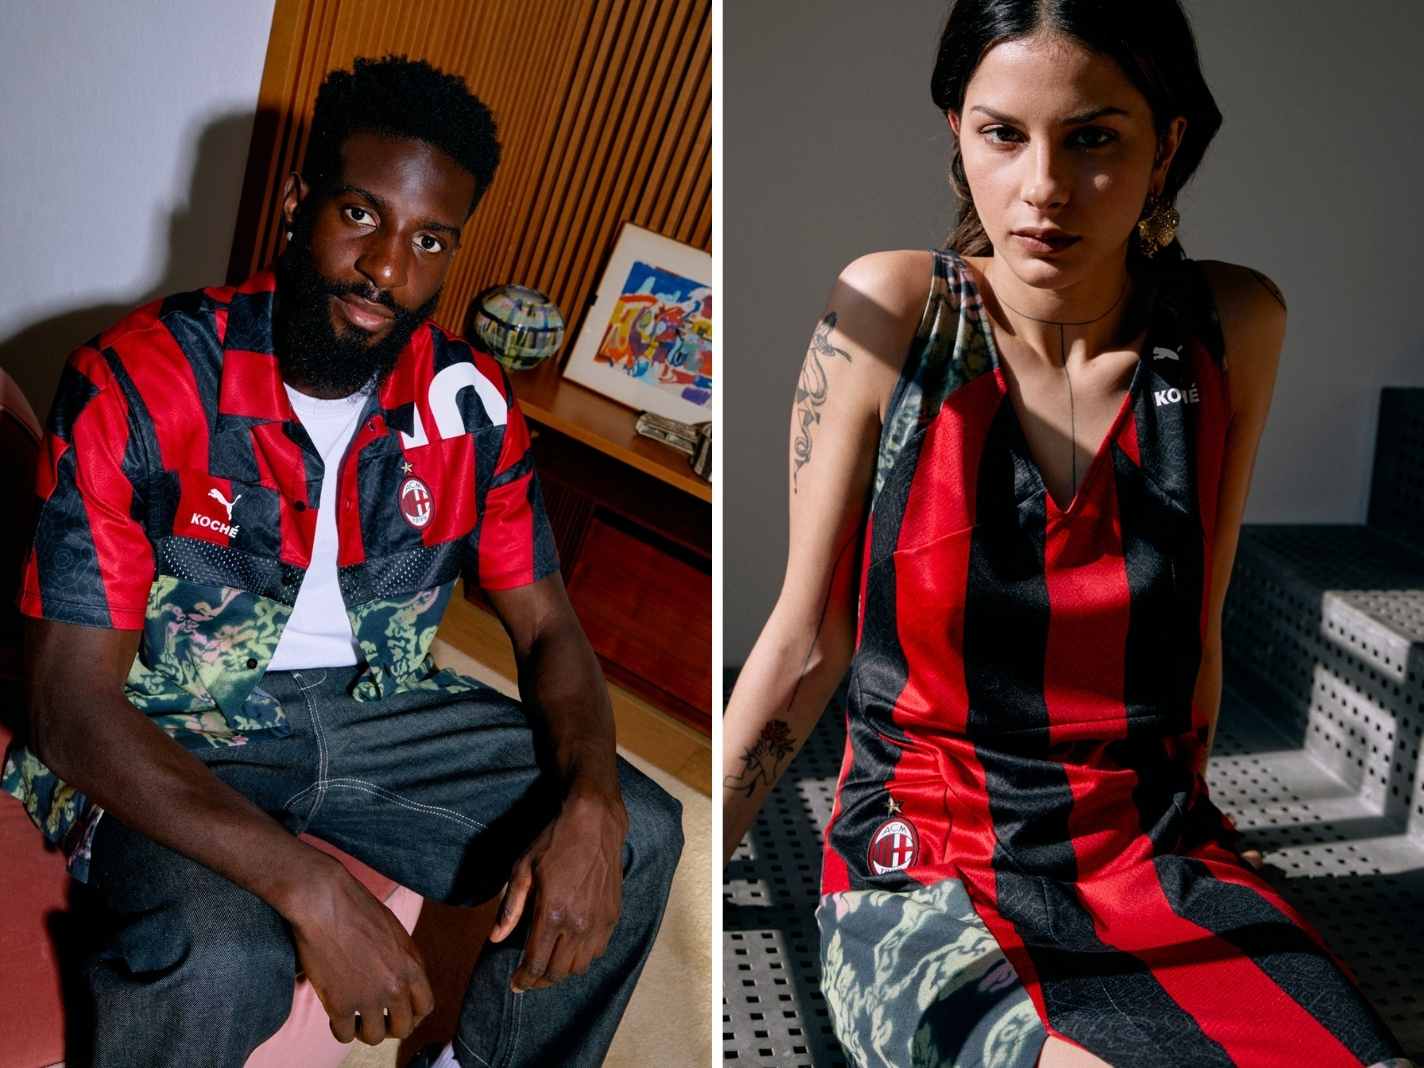 AC Milan teams up with Koche to unveil clothing range made out of unused kits